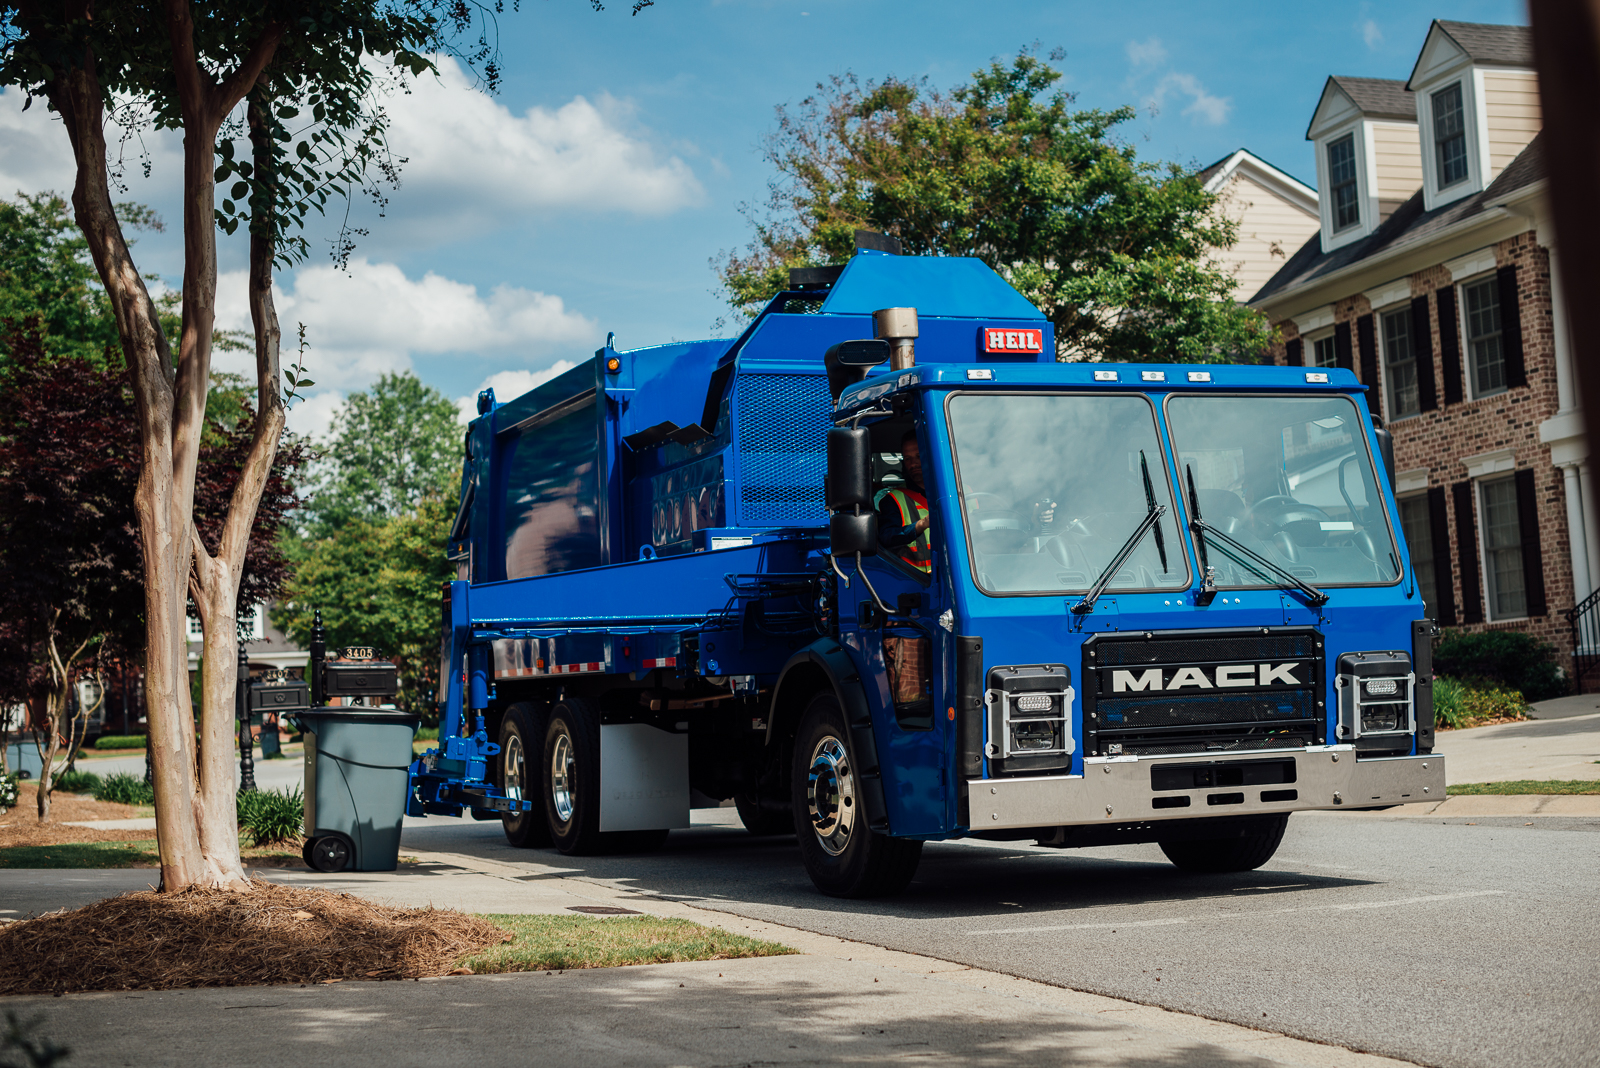 fully electric Mack LR refuse model equipped with an integrated Mack electric drivetrain